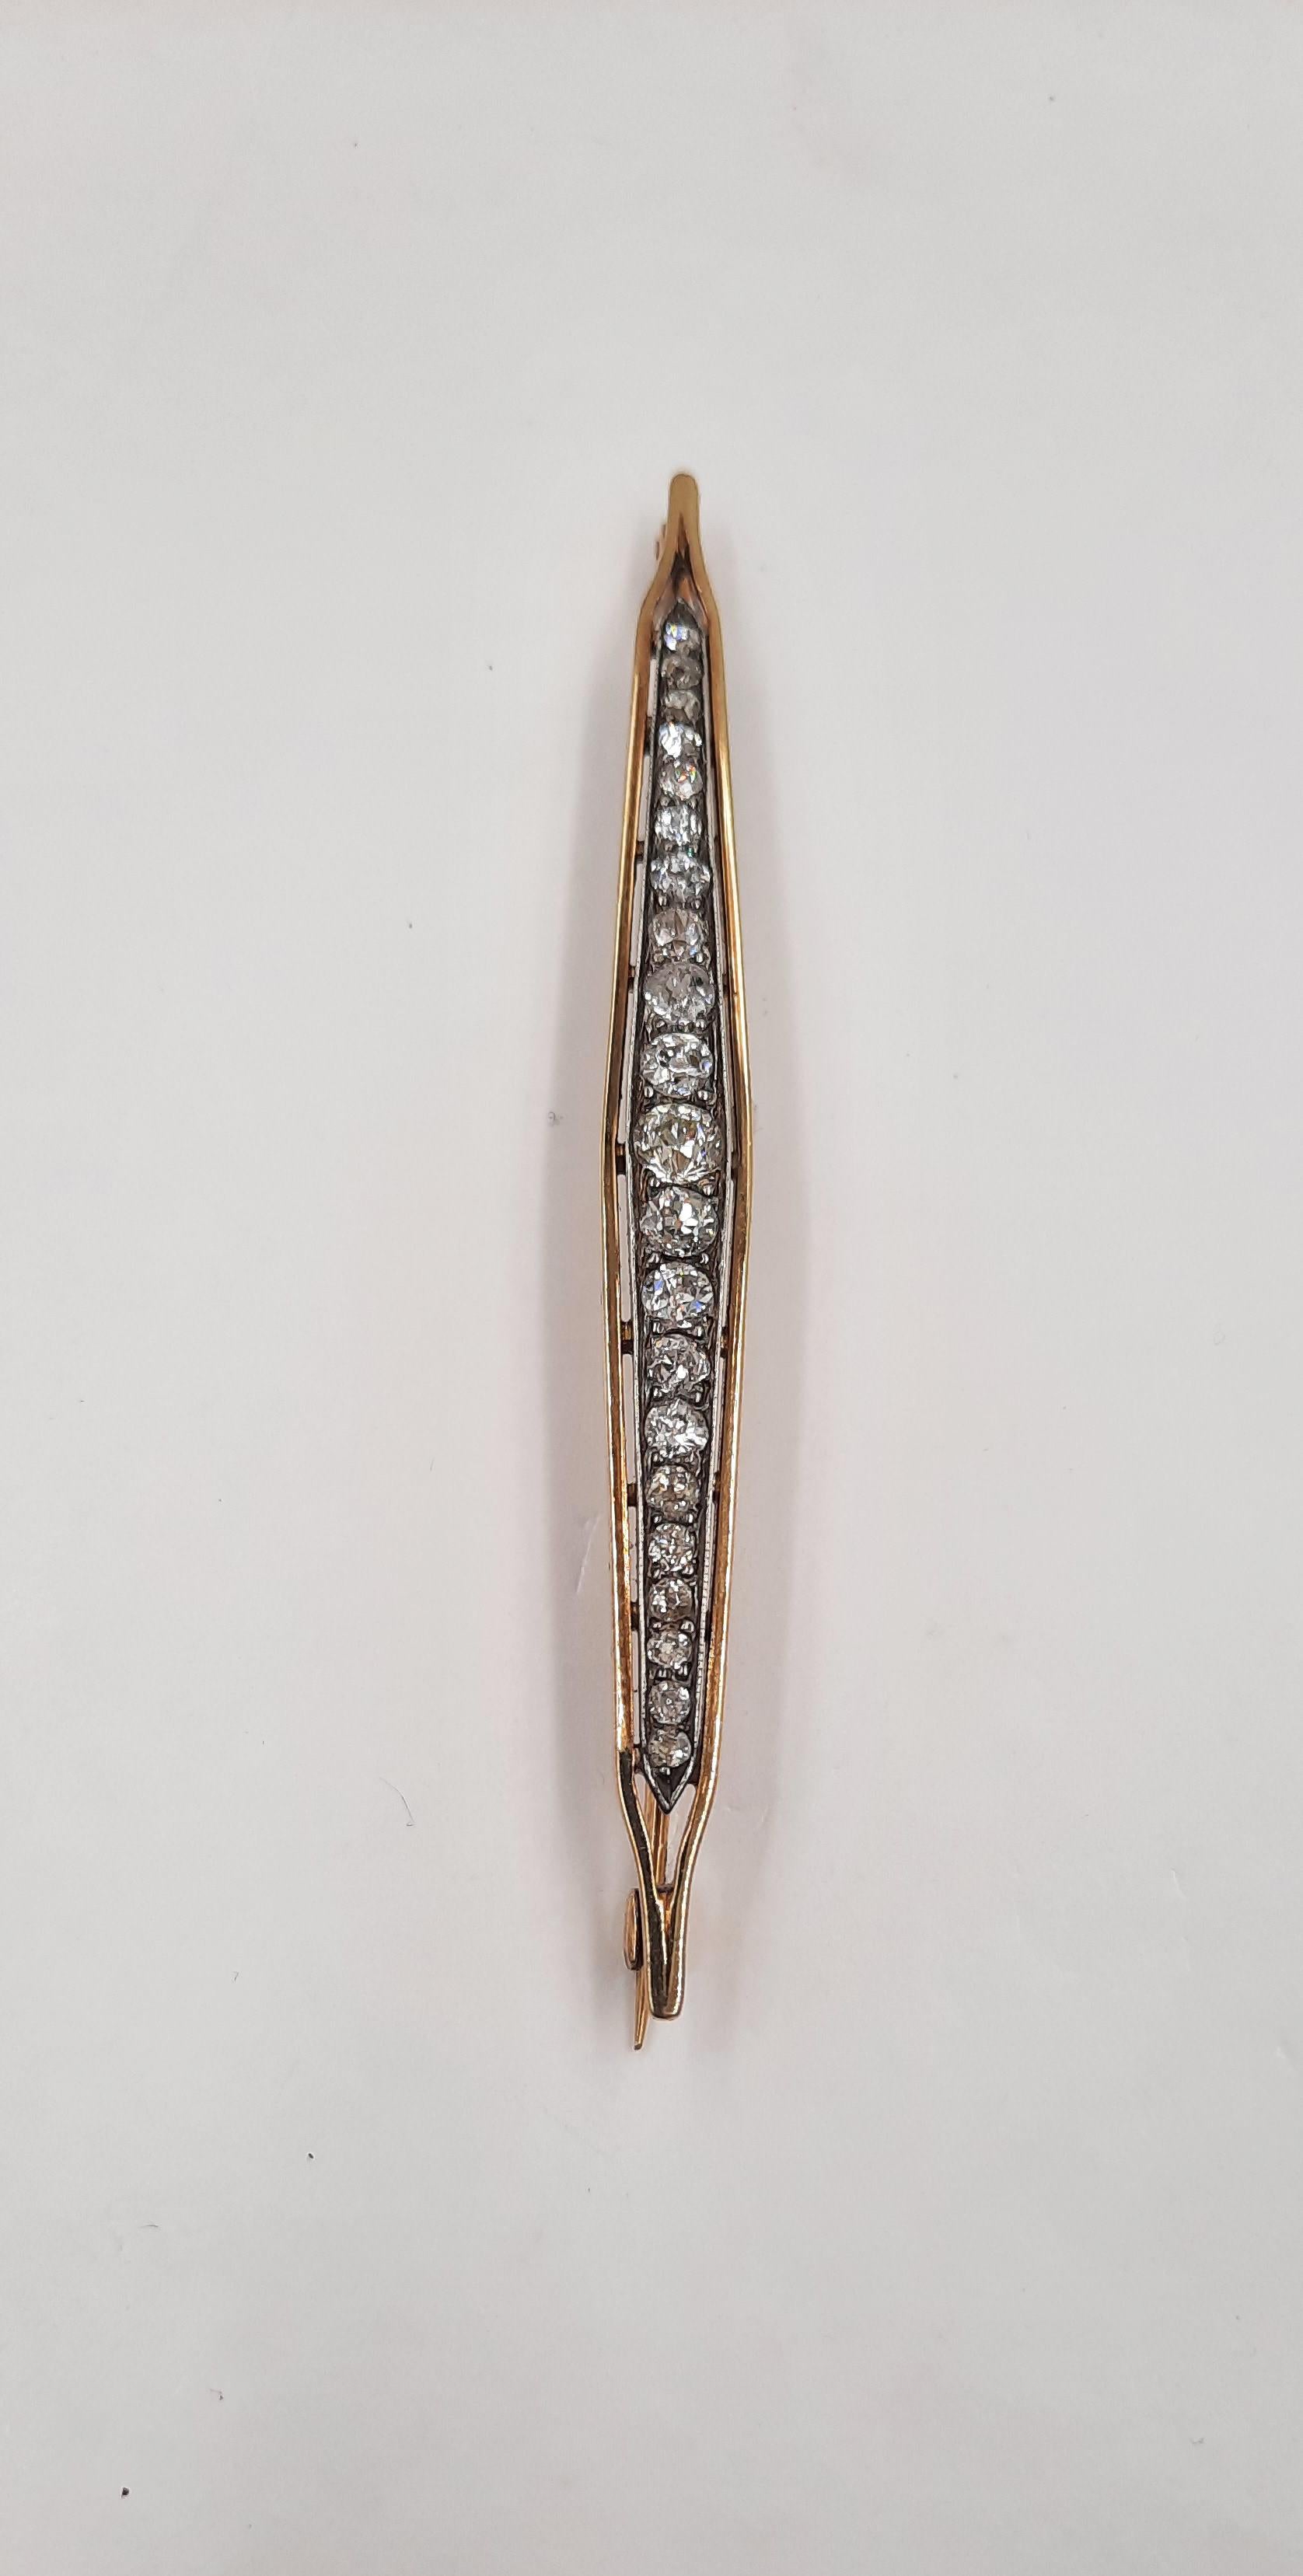 Antique, elegant, Italian bar brooch in 18 carats yellow gold (weight 8,40 grams) with old European cut diamonds (circa 1,20 carats), set in silver. Circa 1900. Length: 80 millimeters. No hallmarks or stamps, but tested as gold.